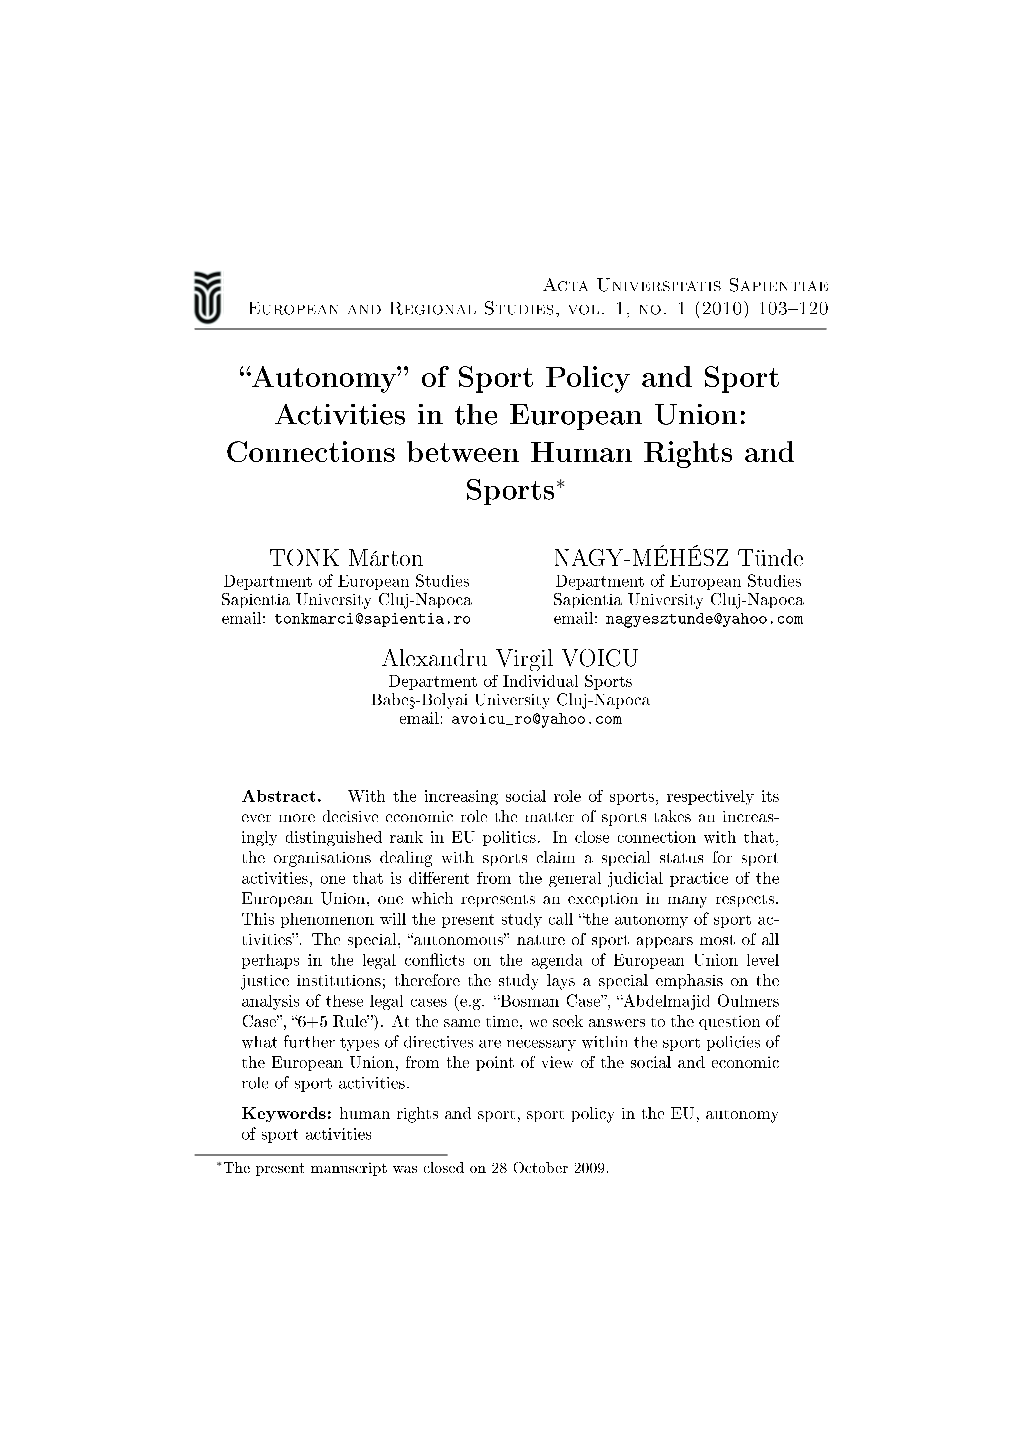 Autonomy of Sport Policy and Sport Activities in the European Union